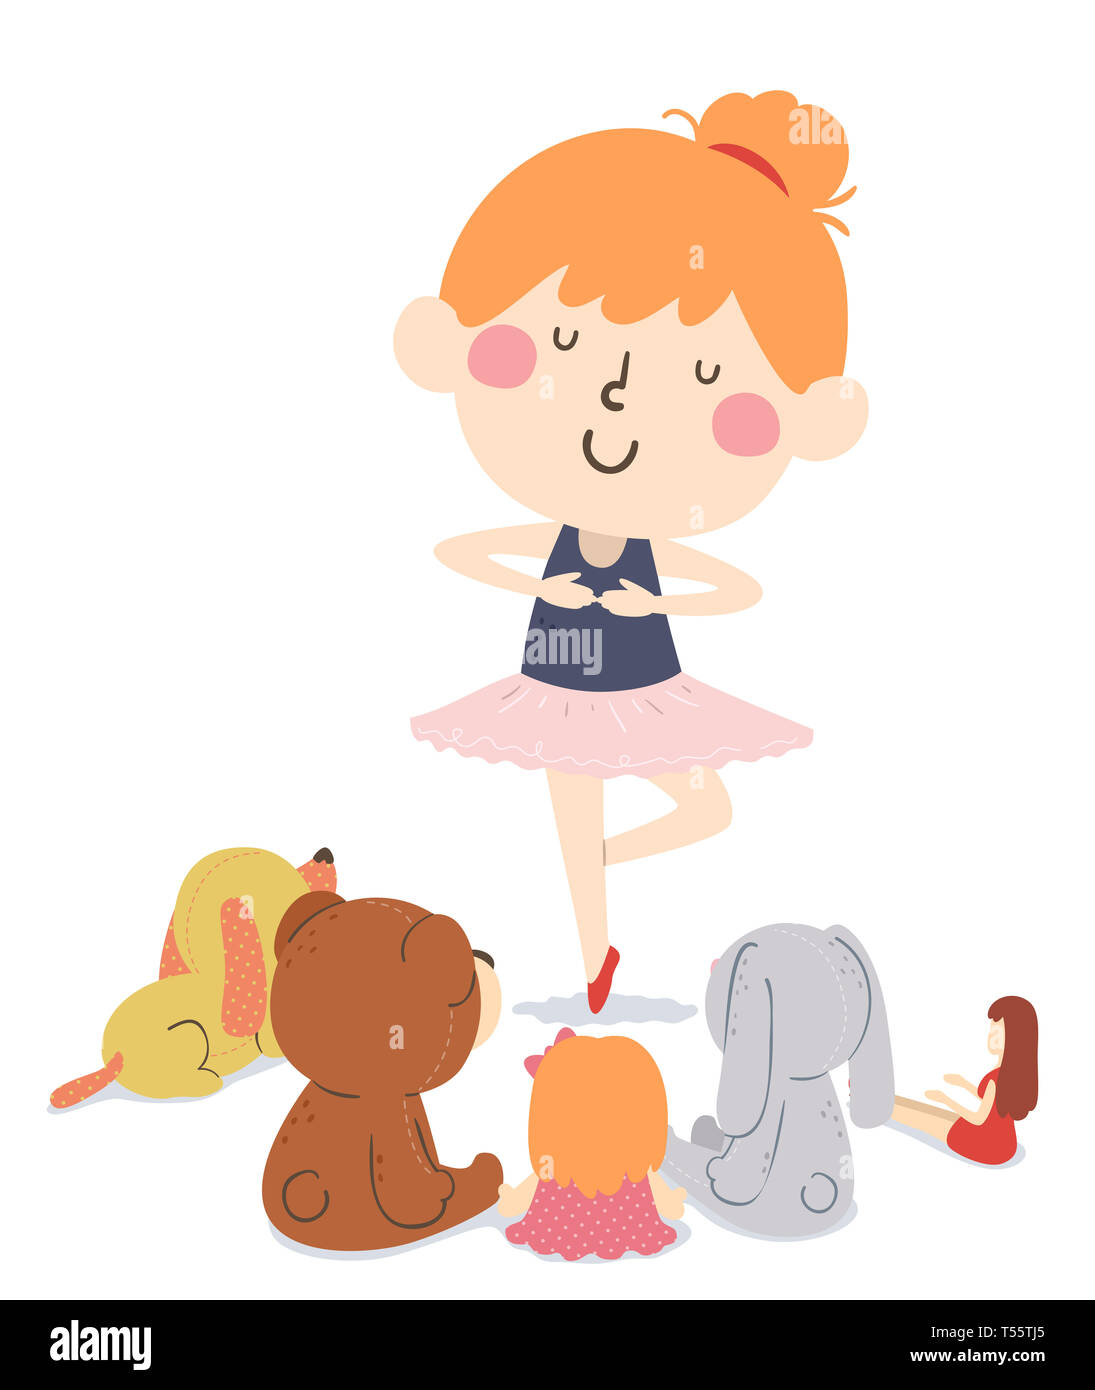 Illustration of a Kid Girl Wearing Ballet Tutu Dancing In Front of Her Stuffed Toys Gathered Around Stock Photo